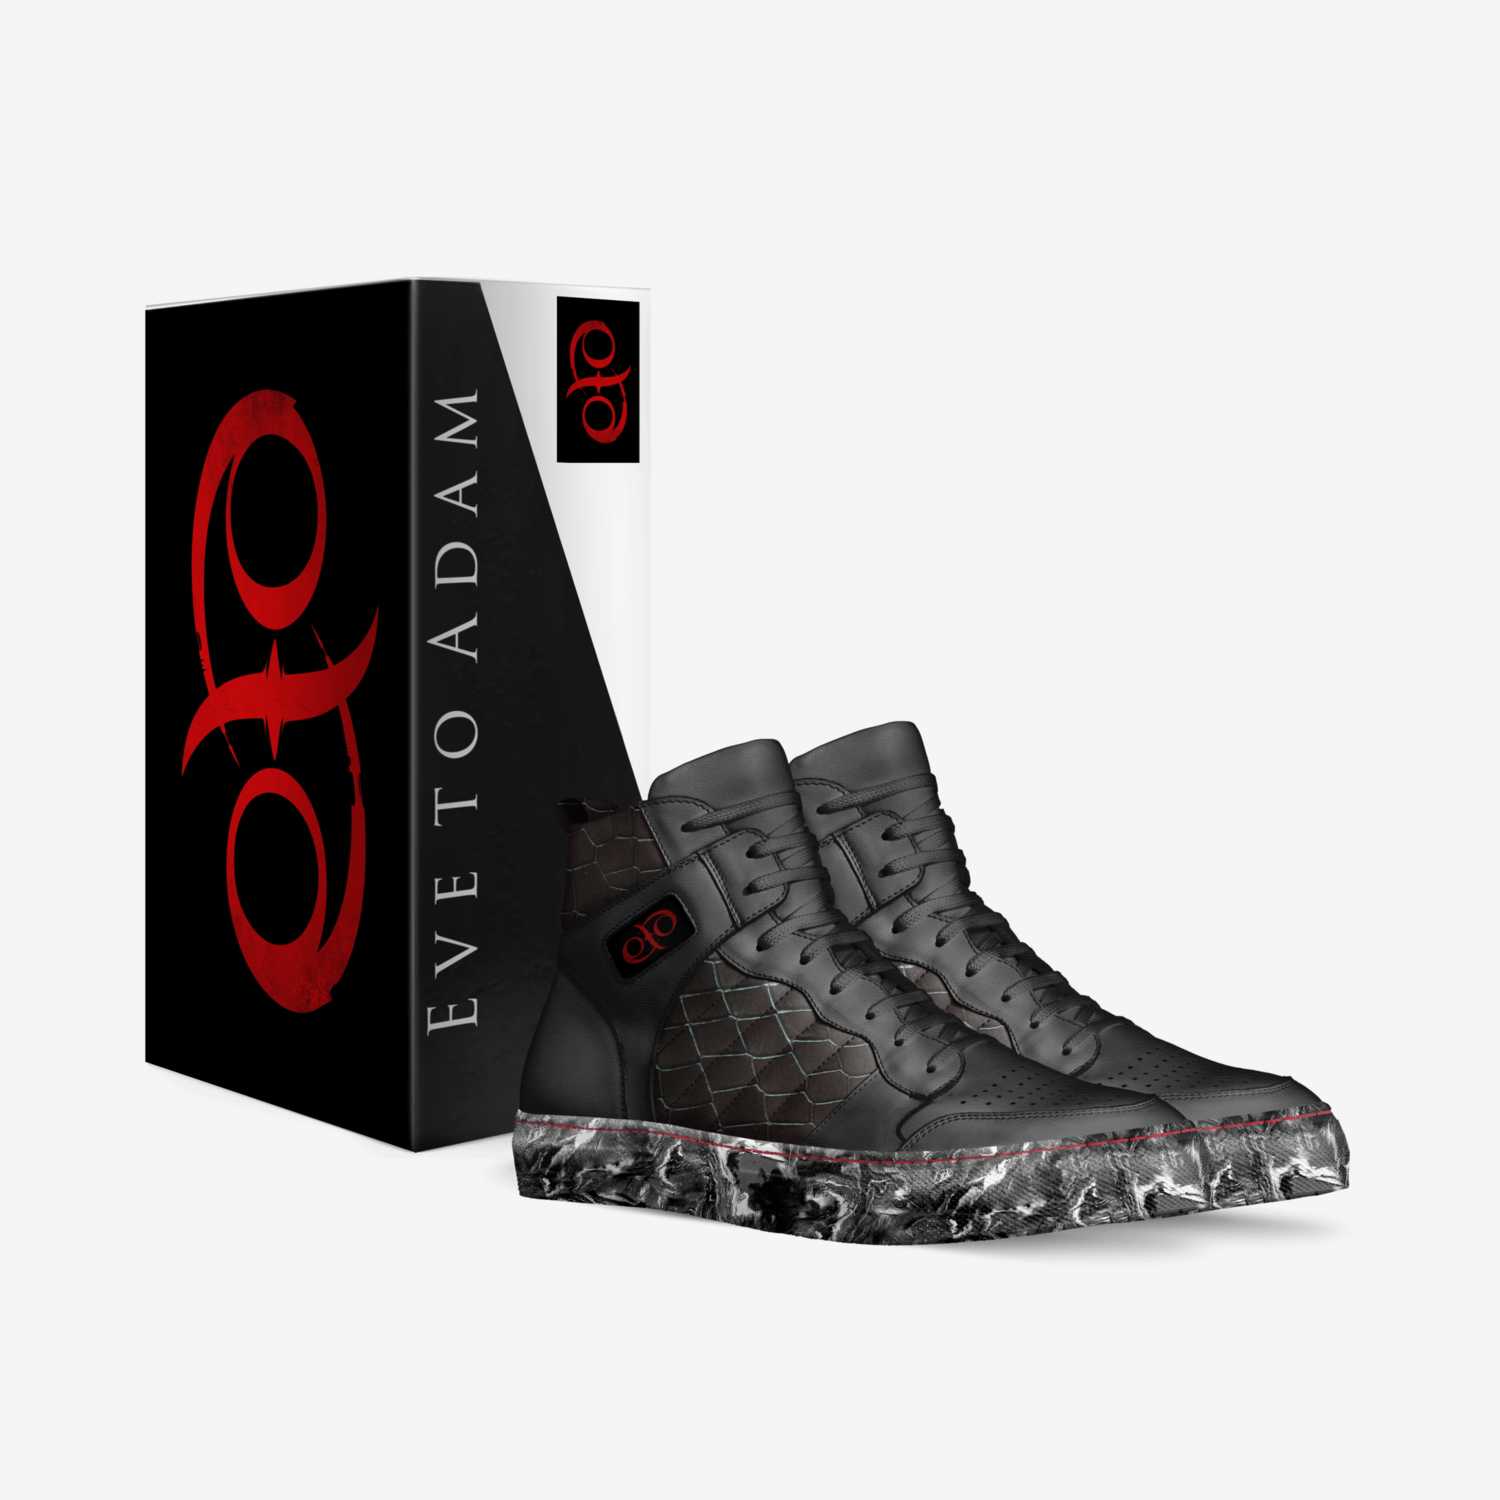 IMMORTALS custom made in Italy shoes by Pimptronot | Box view